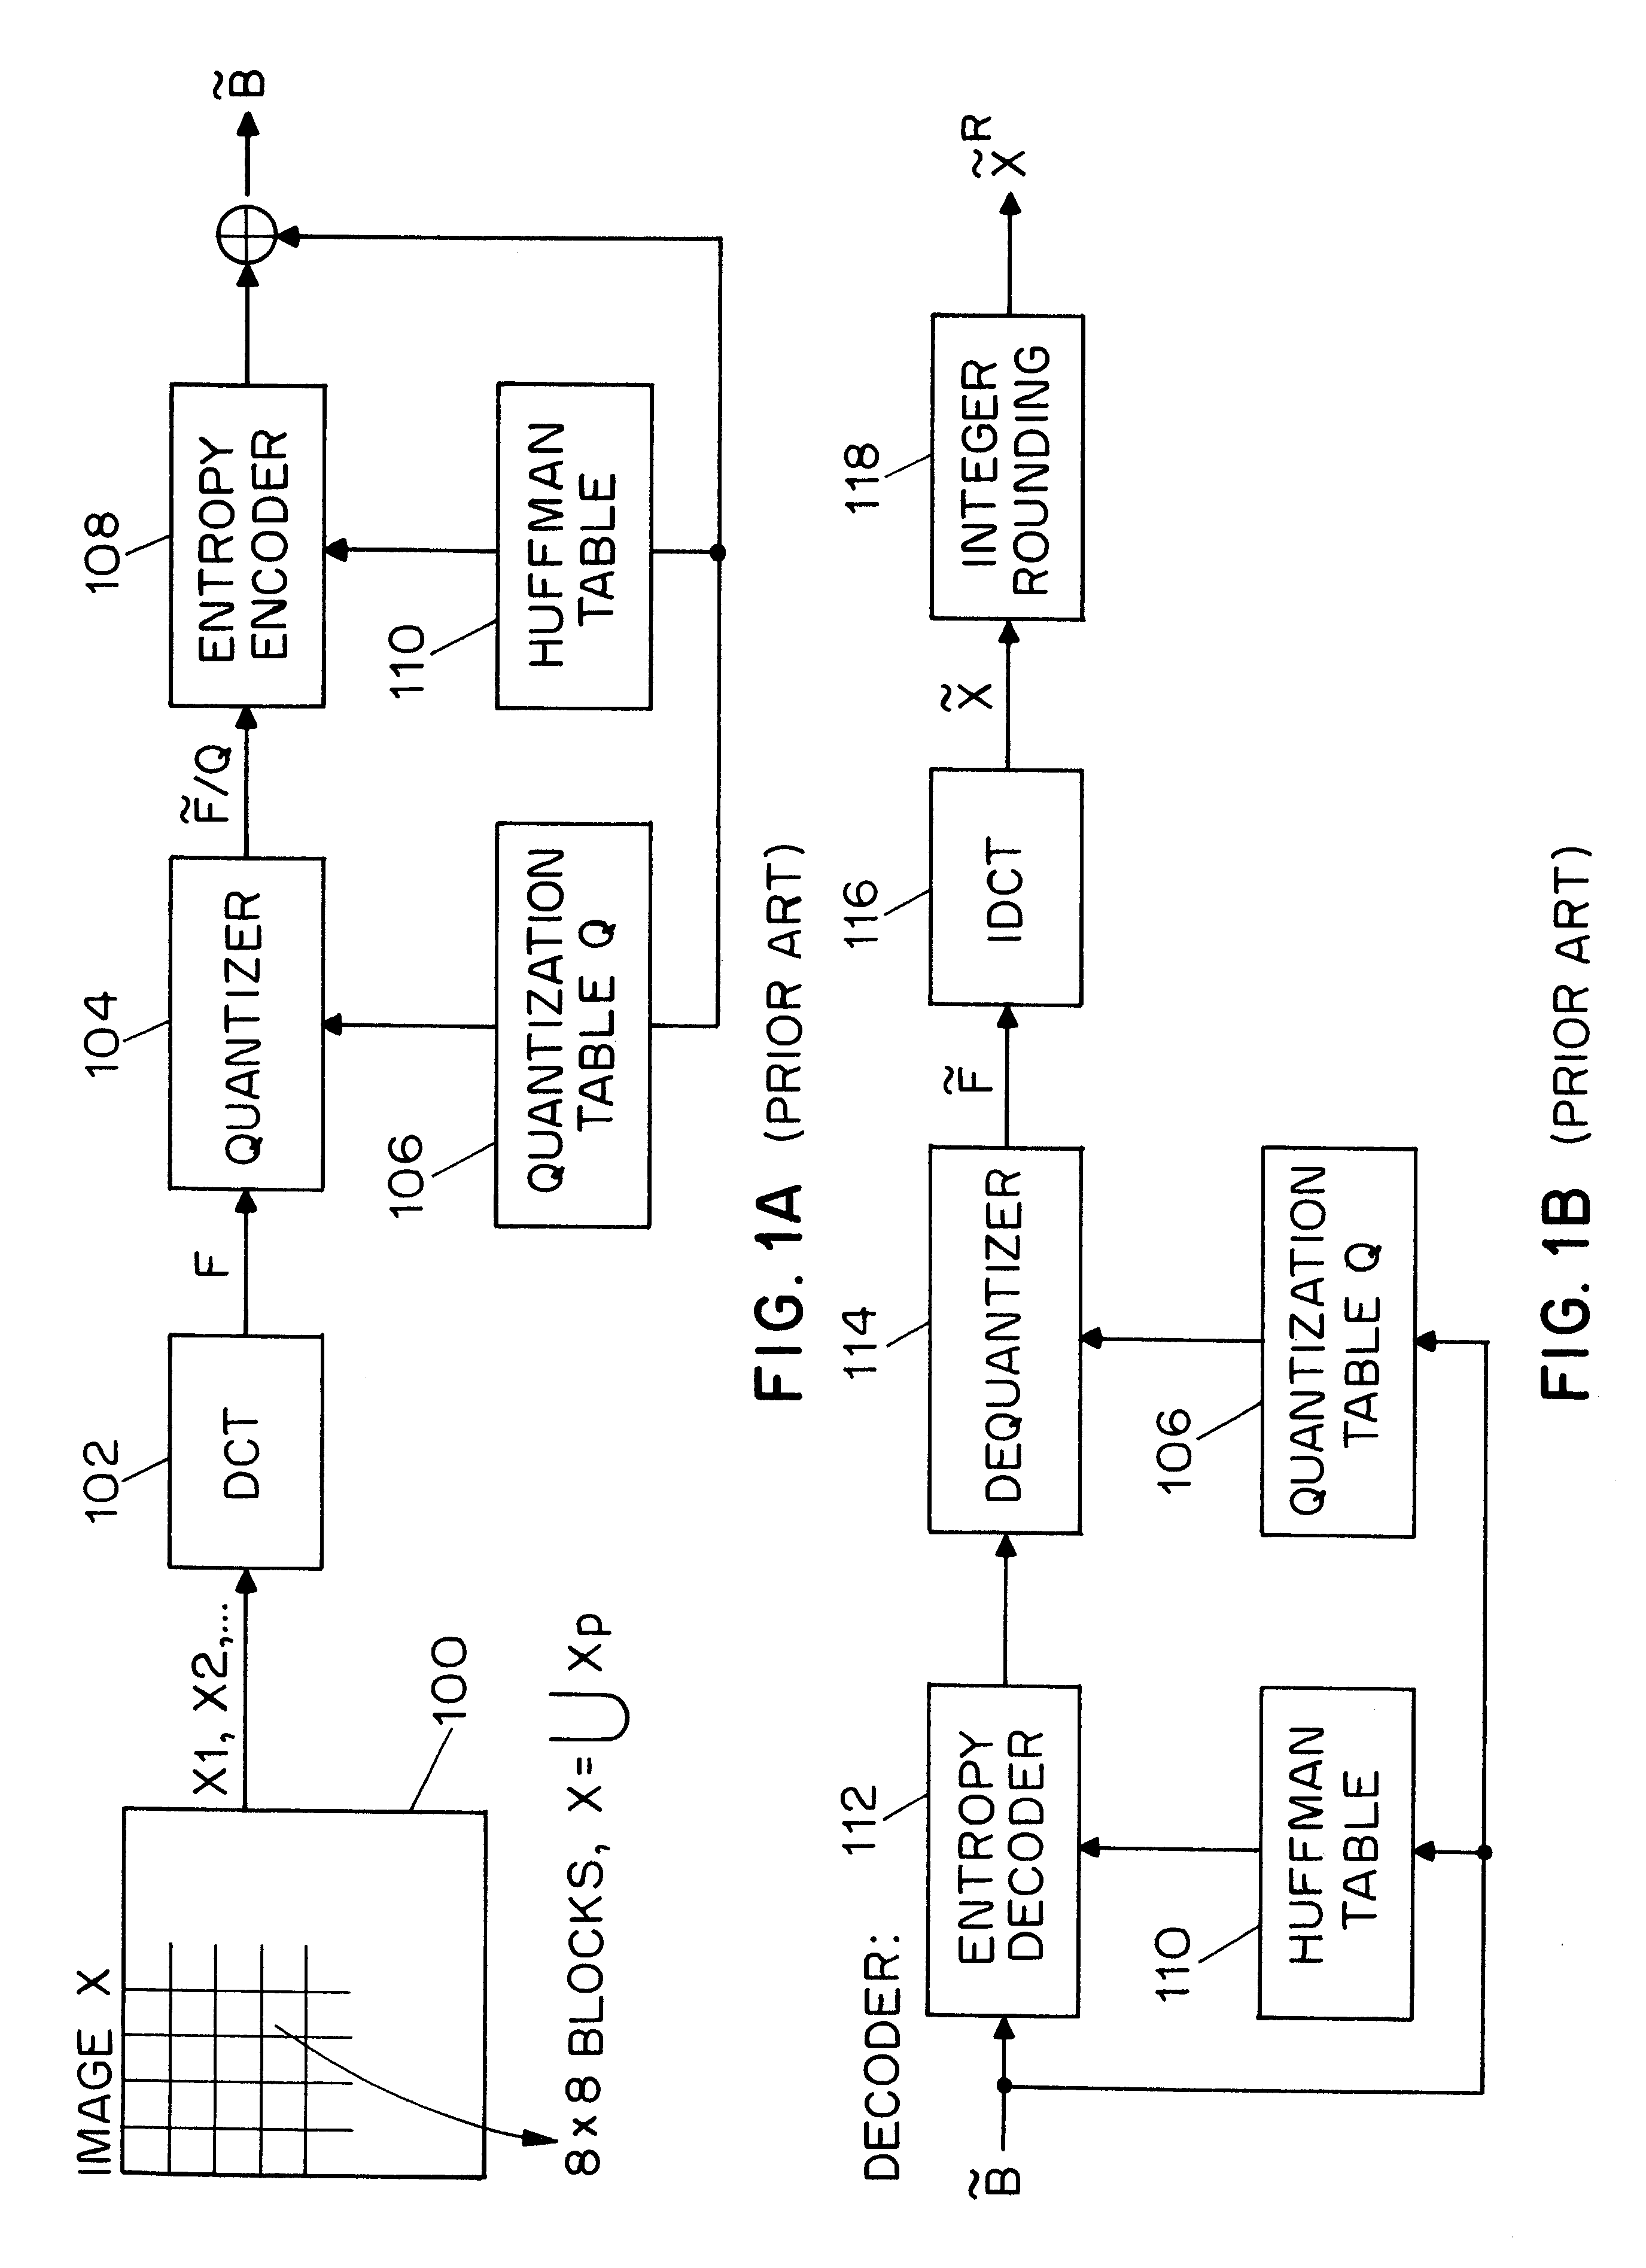 Method and apparatus for image authentication